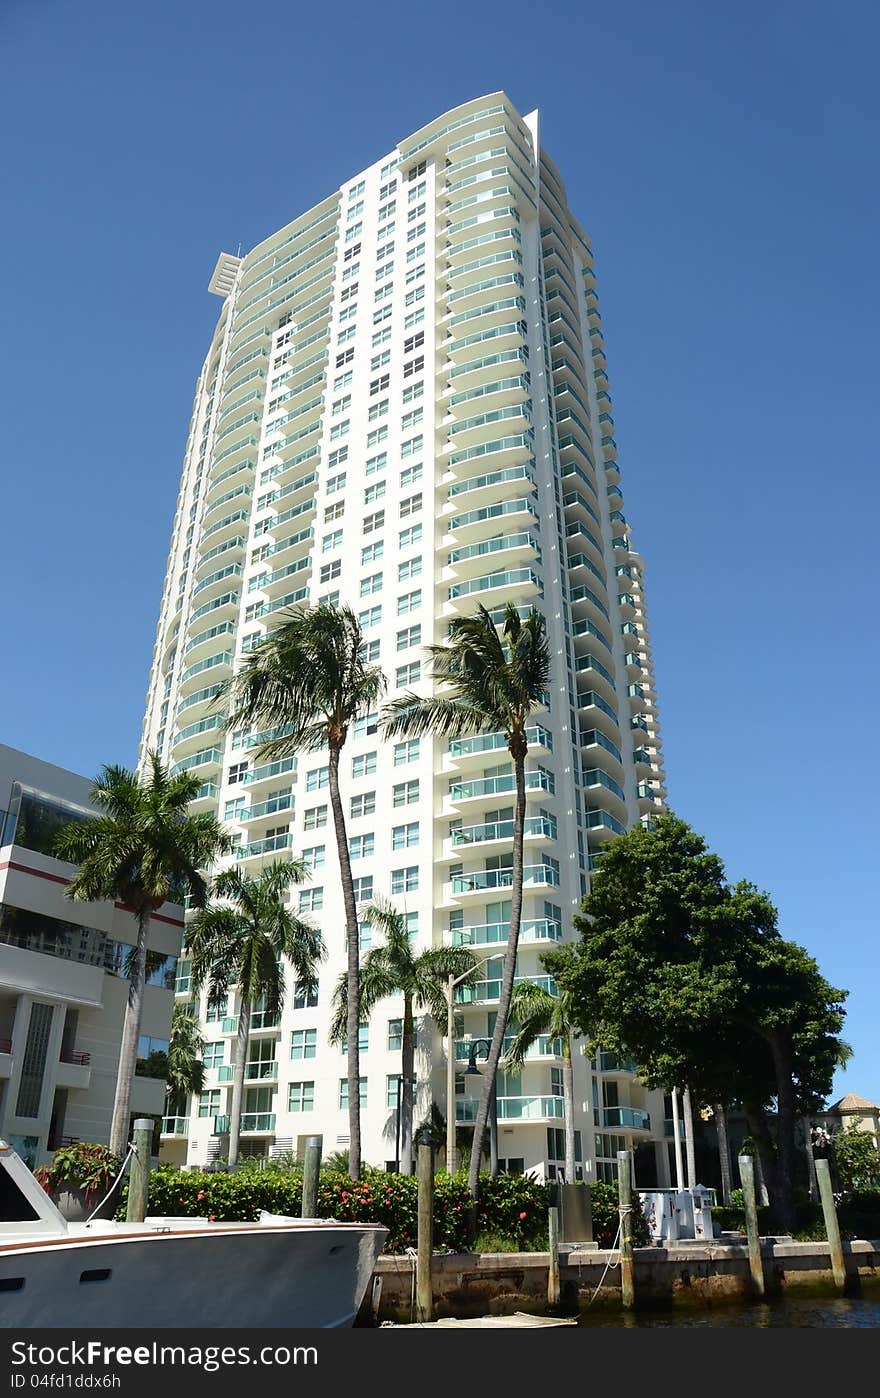 Luxury apartments in exclusive waterfront of Fort Lauderdale, Florida. Luxury apartments in exclusive waterfront of Fort Lauderdale, Florida